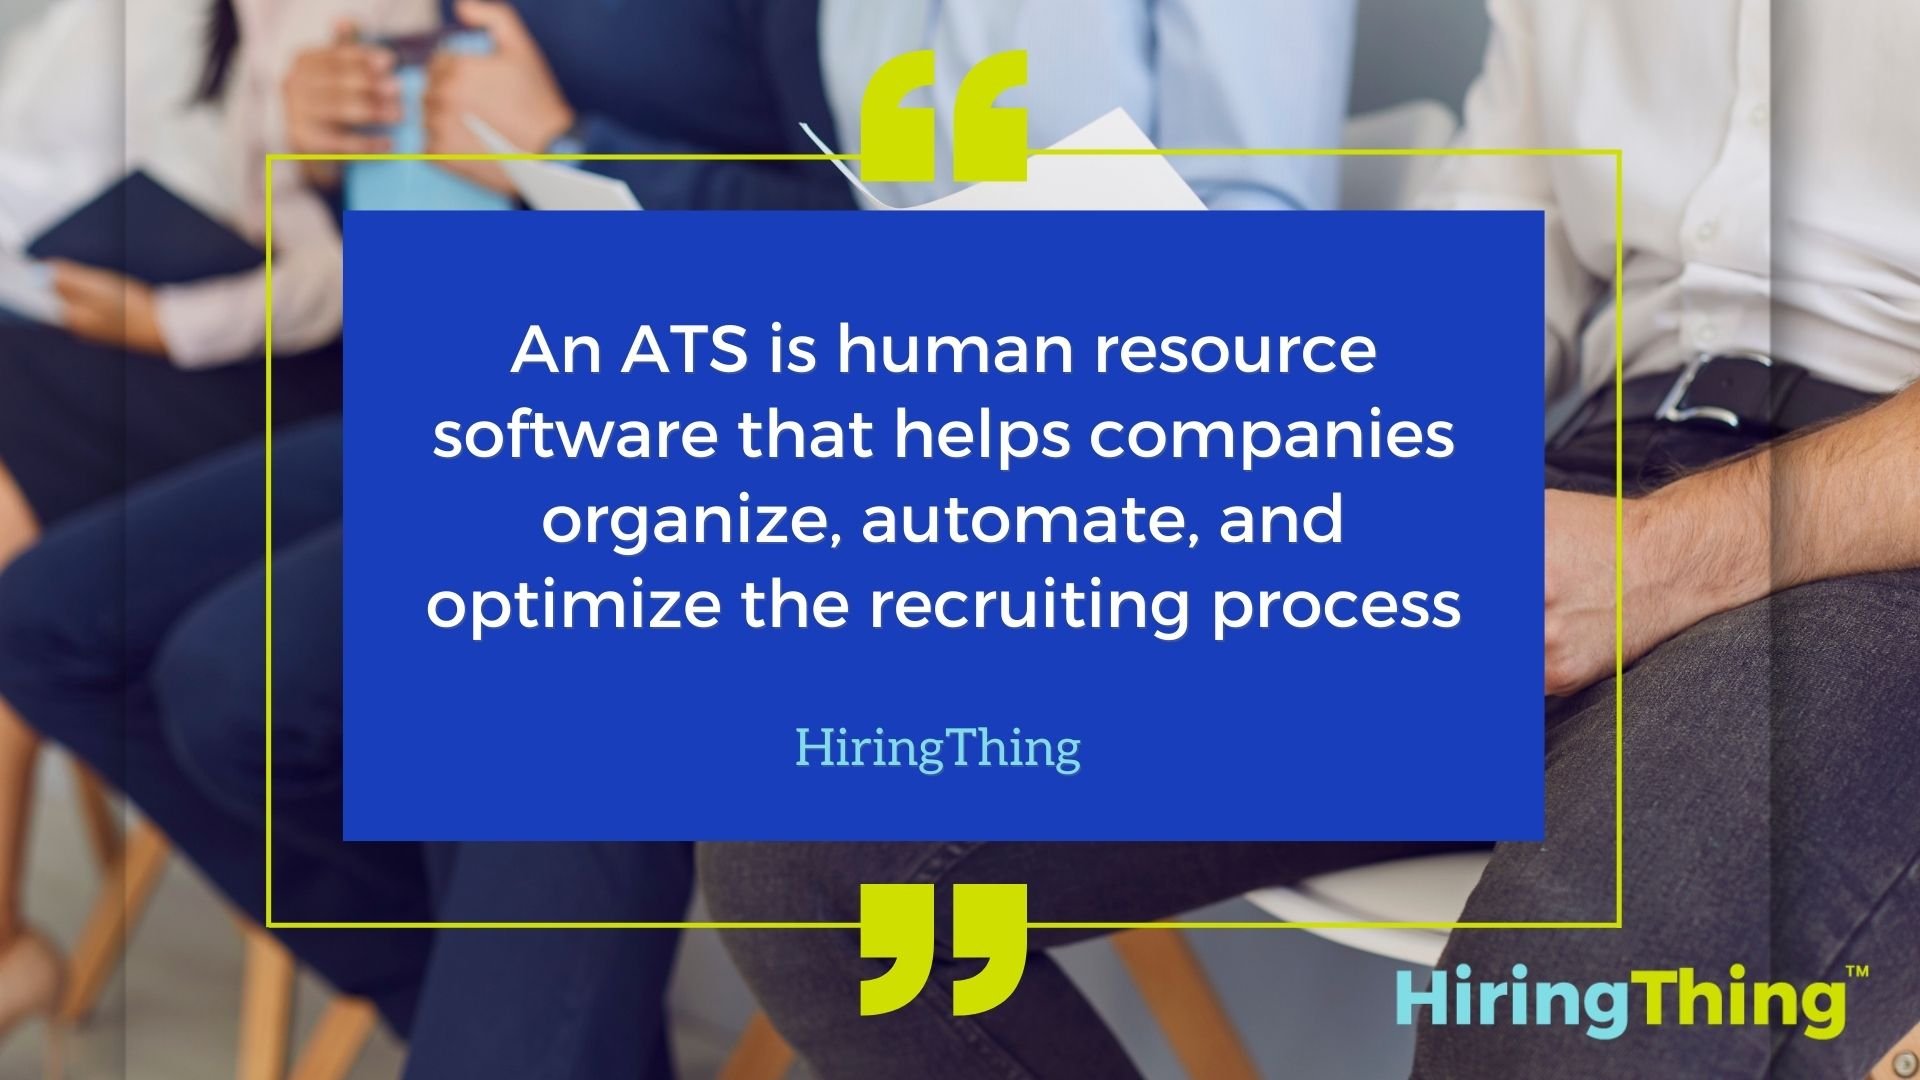 An ATS is human resource software that helps companies organize, automate, and optimize the recruiting process